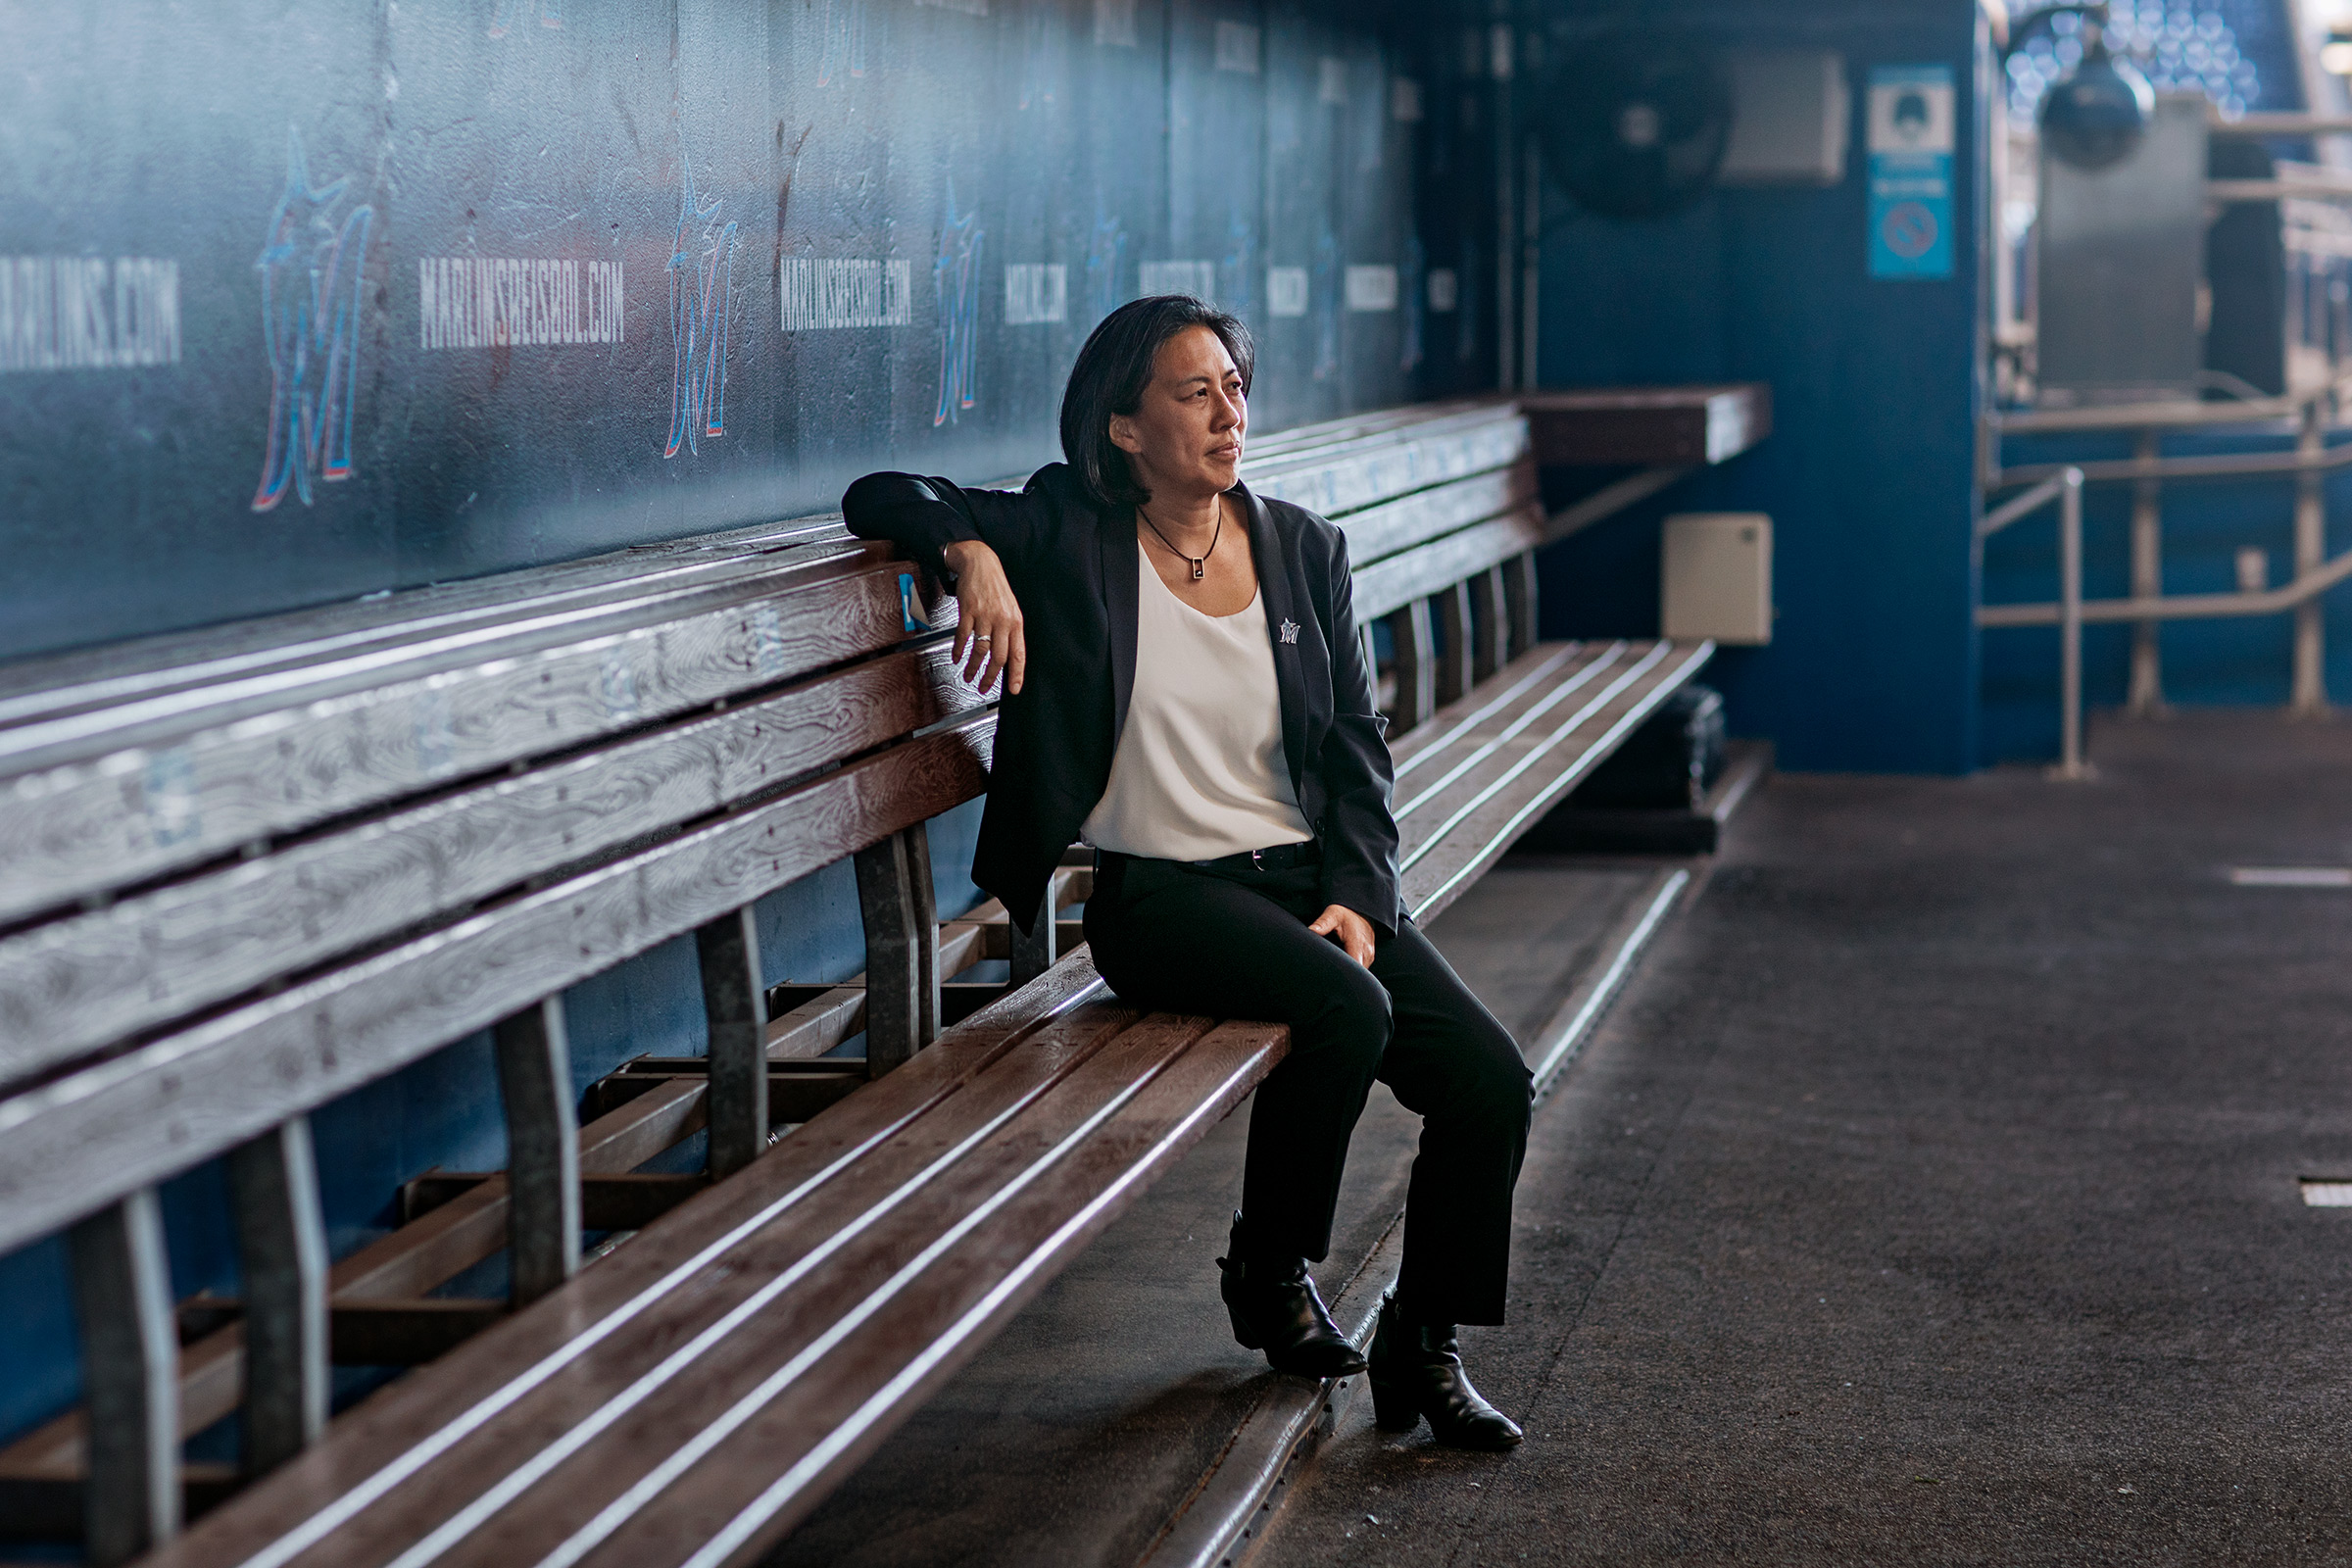 Kim Ng in the dugout of Marlins Park in Miami on Feb. 9